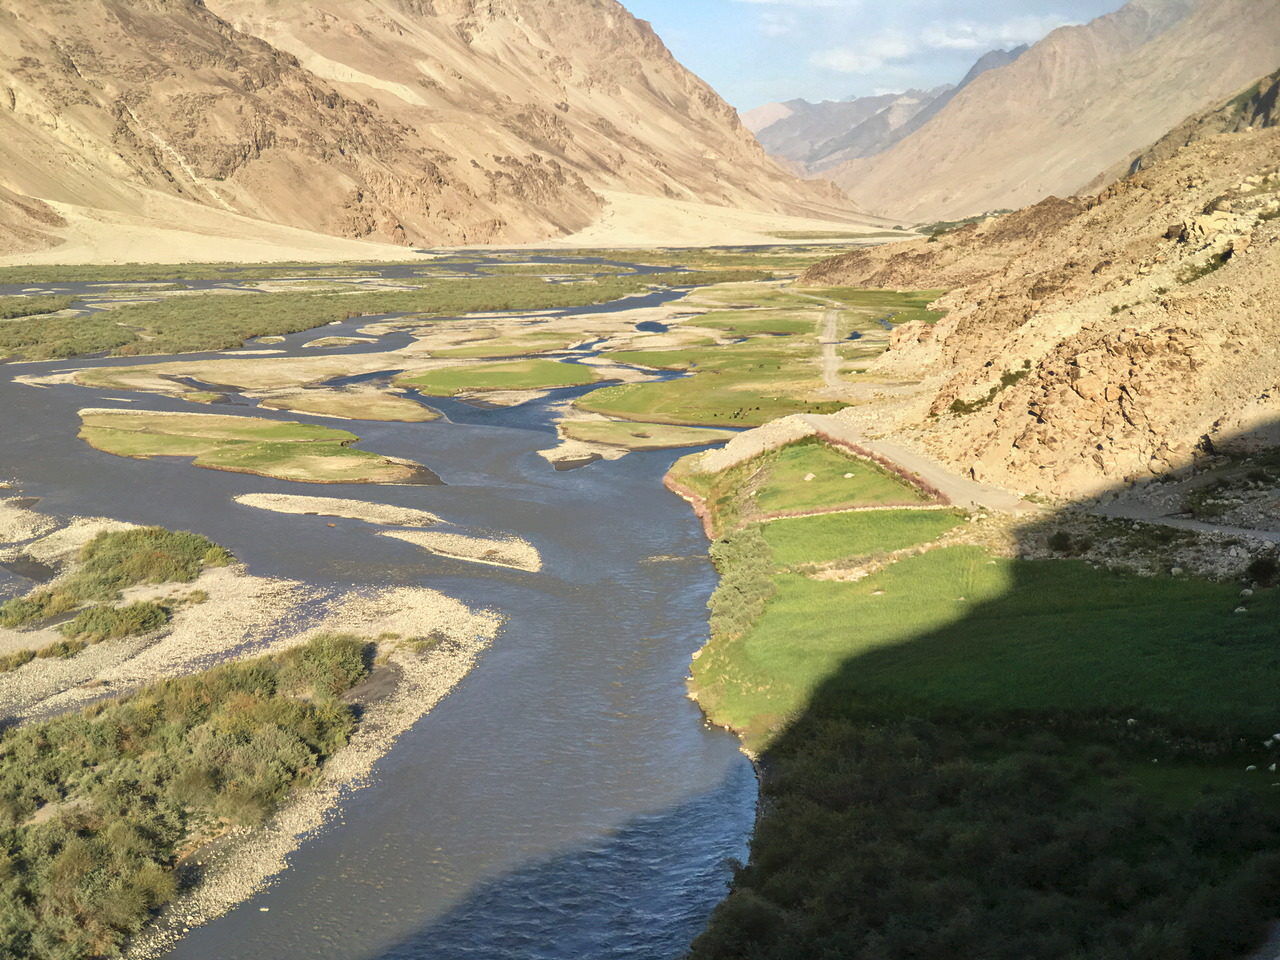 Wakhan River in the evening light